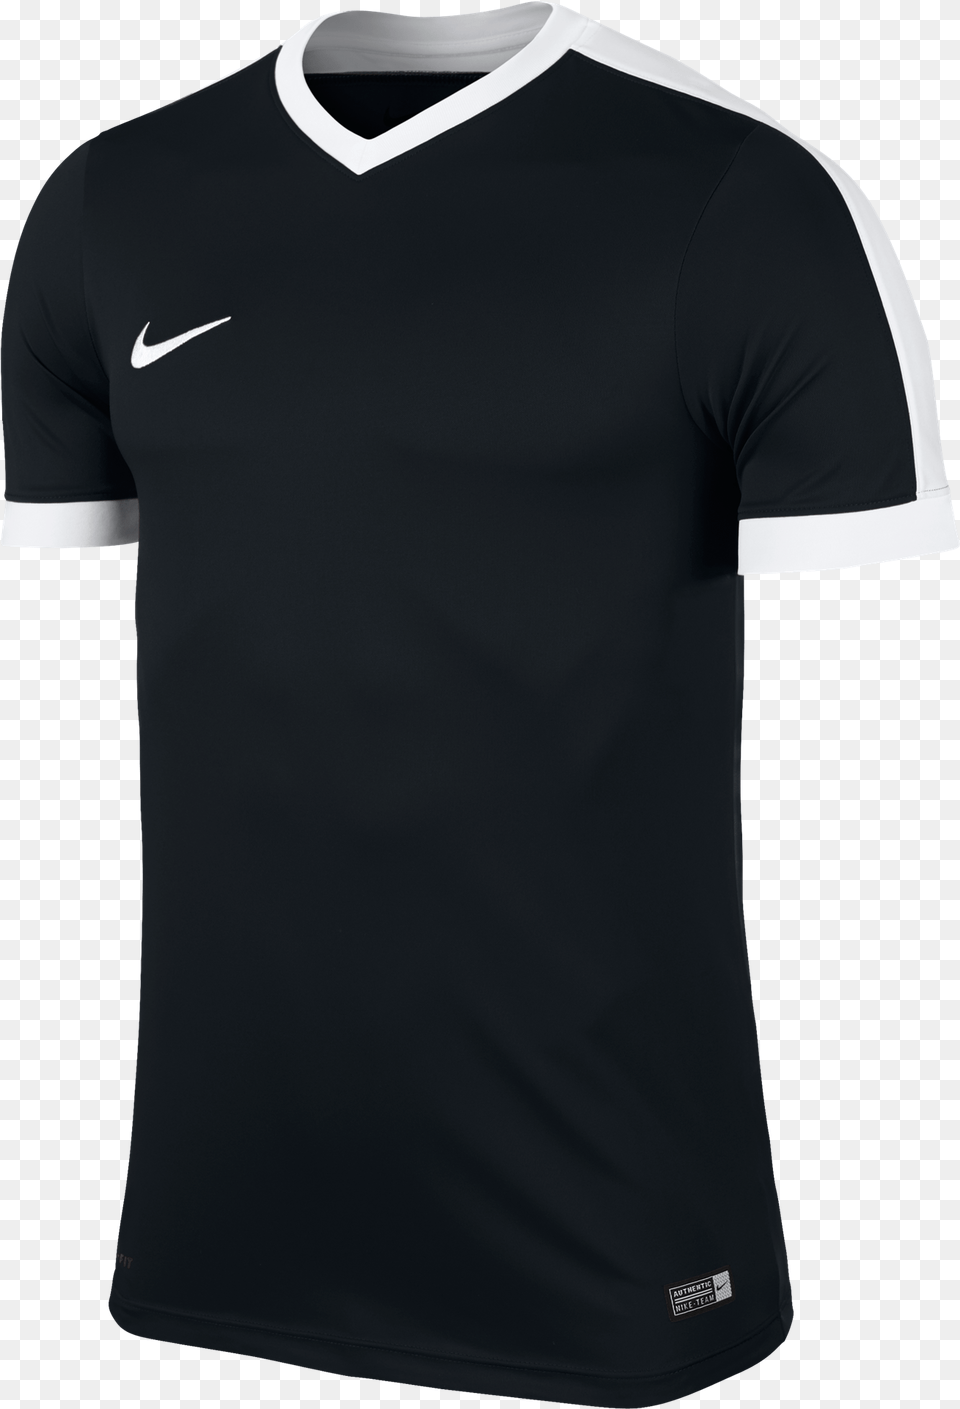 Football Jersey For Free Download, Clothing, Shirt, T-shirt Png Image